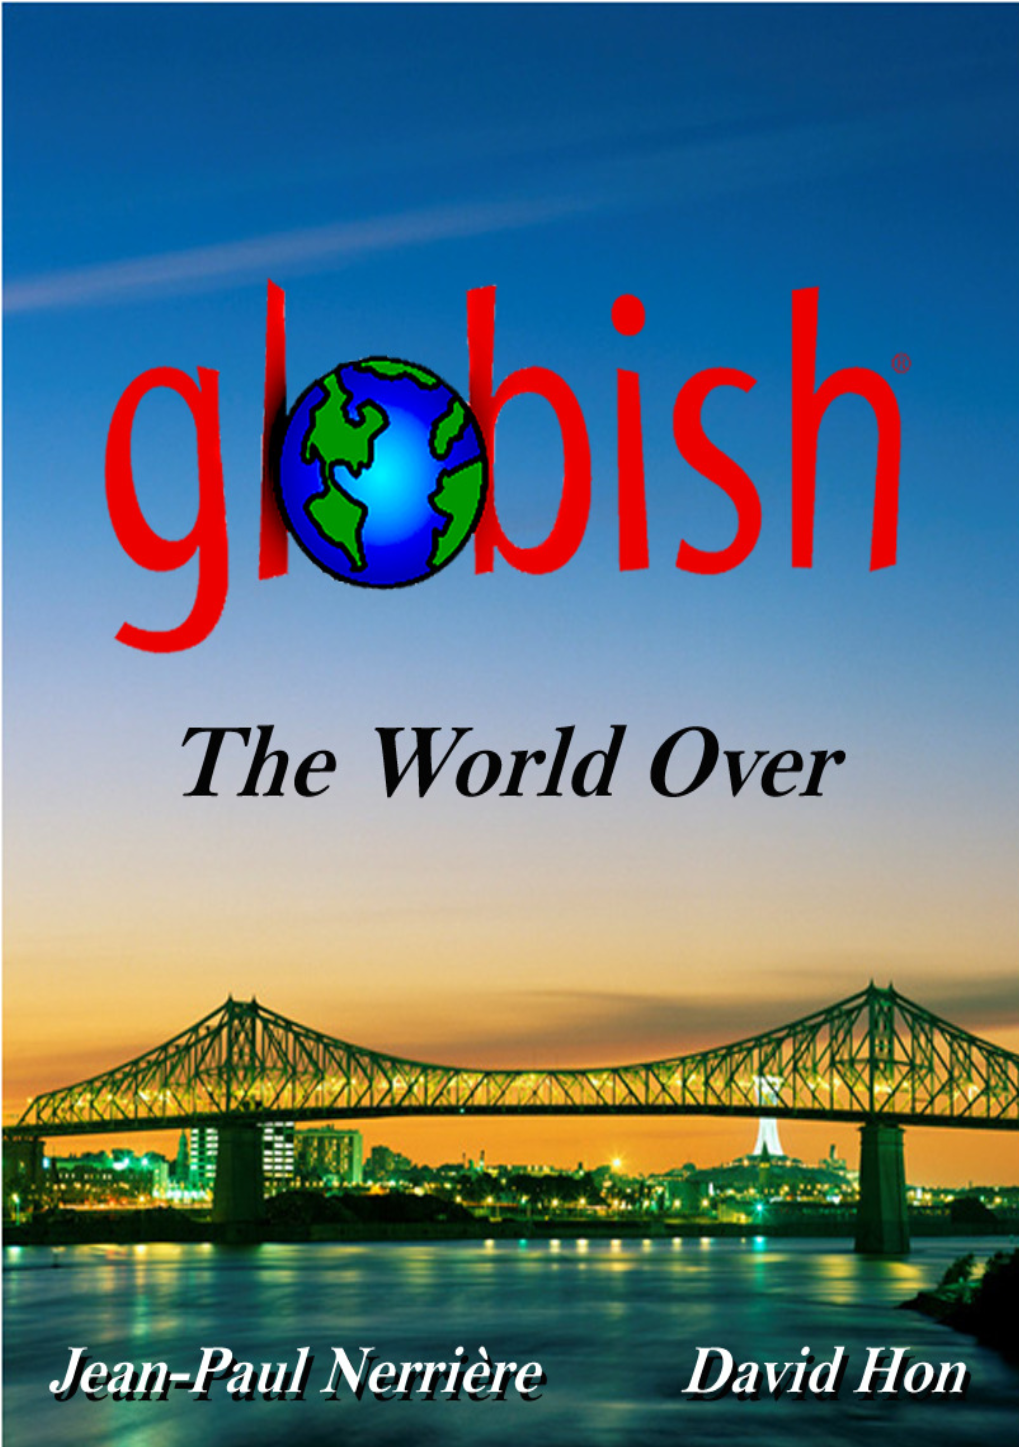 Download 2 Free Chapters from 'Globish the World Over'